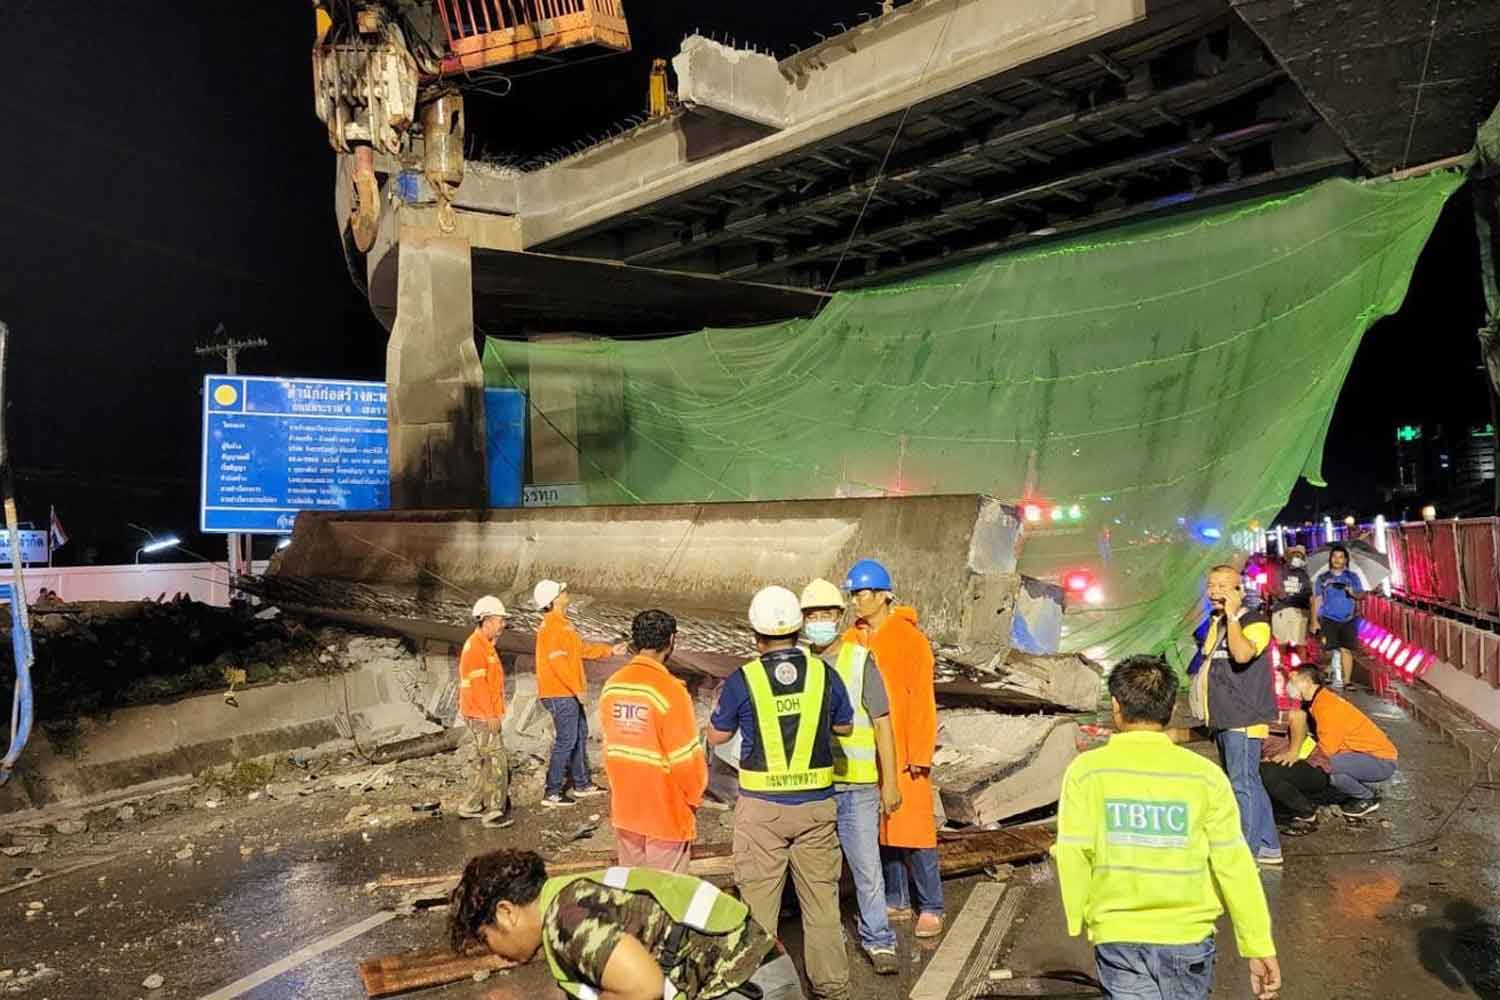 Bridge Collapse that Killed 2 People, Most Likely Human Error